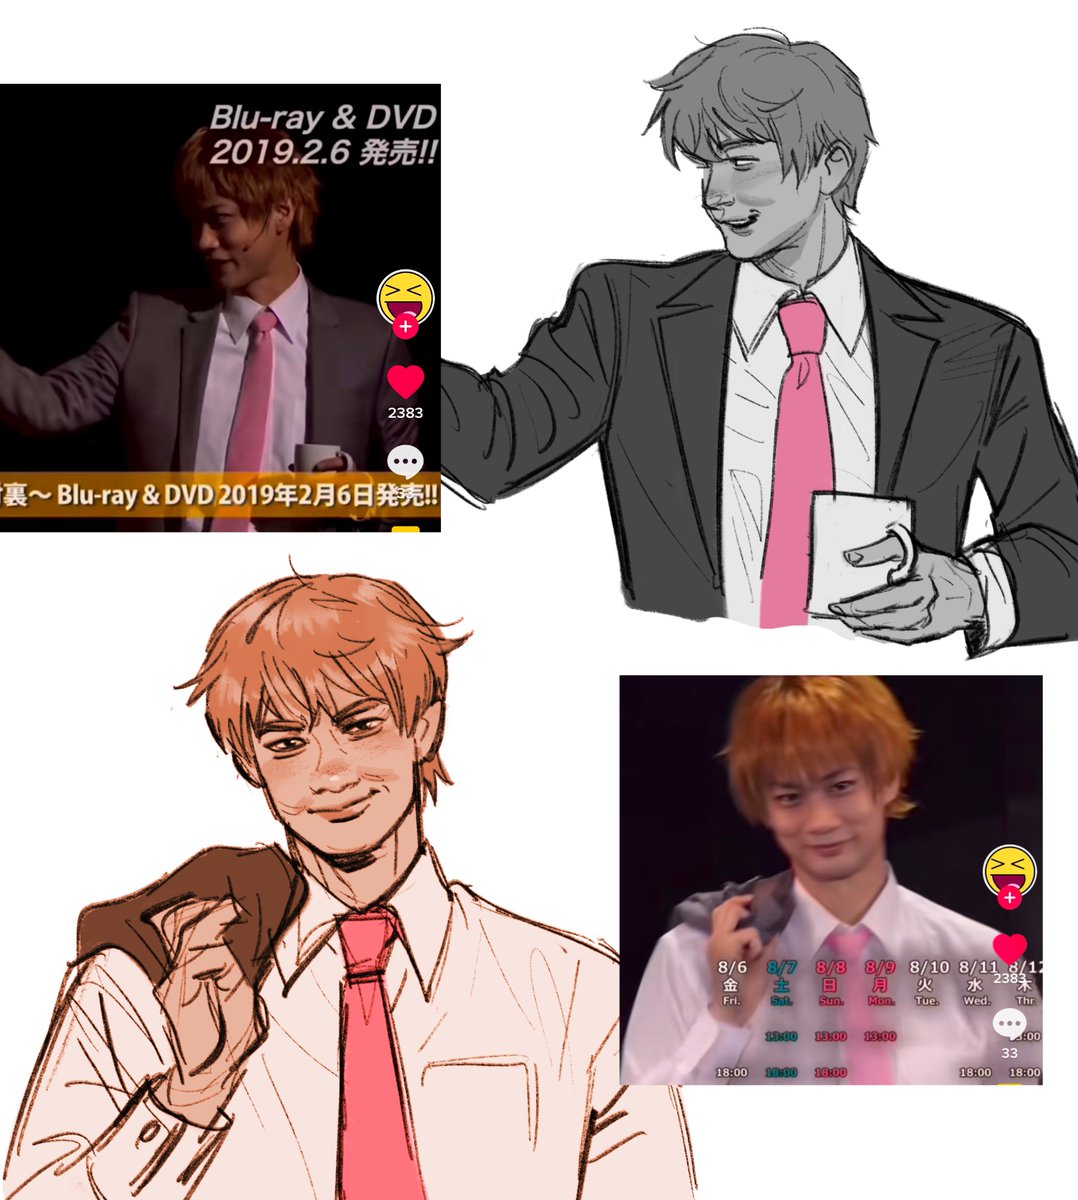 STAGE PLAY REIGEN U WILL BE FAMOUSSSS #mp100 